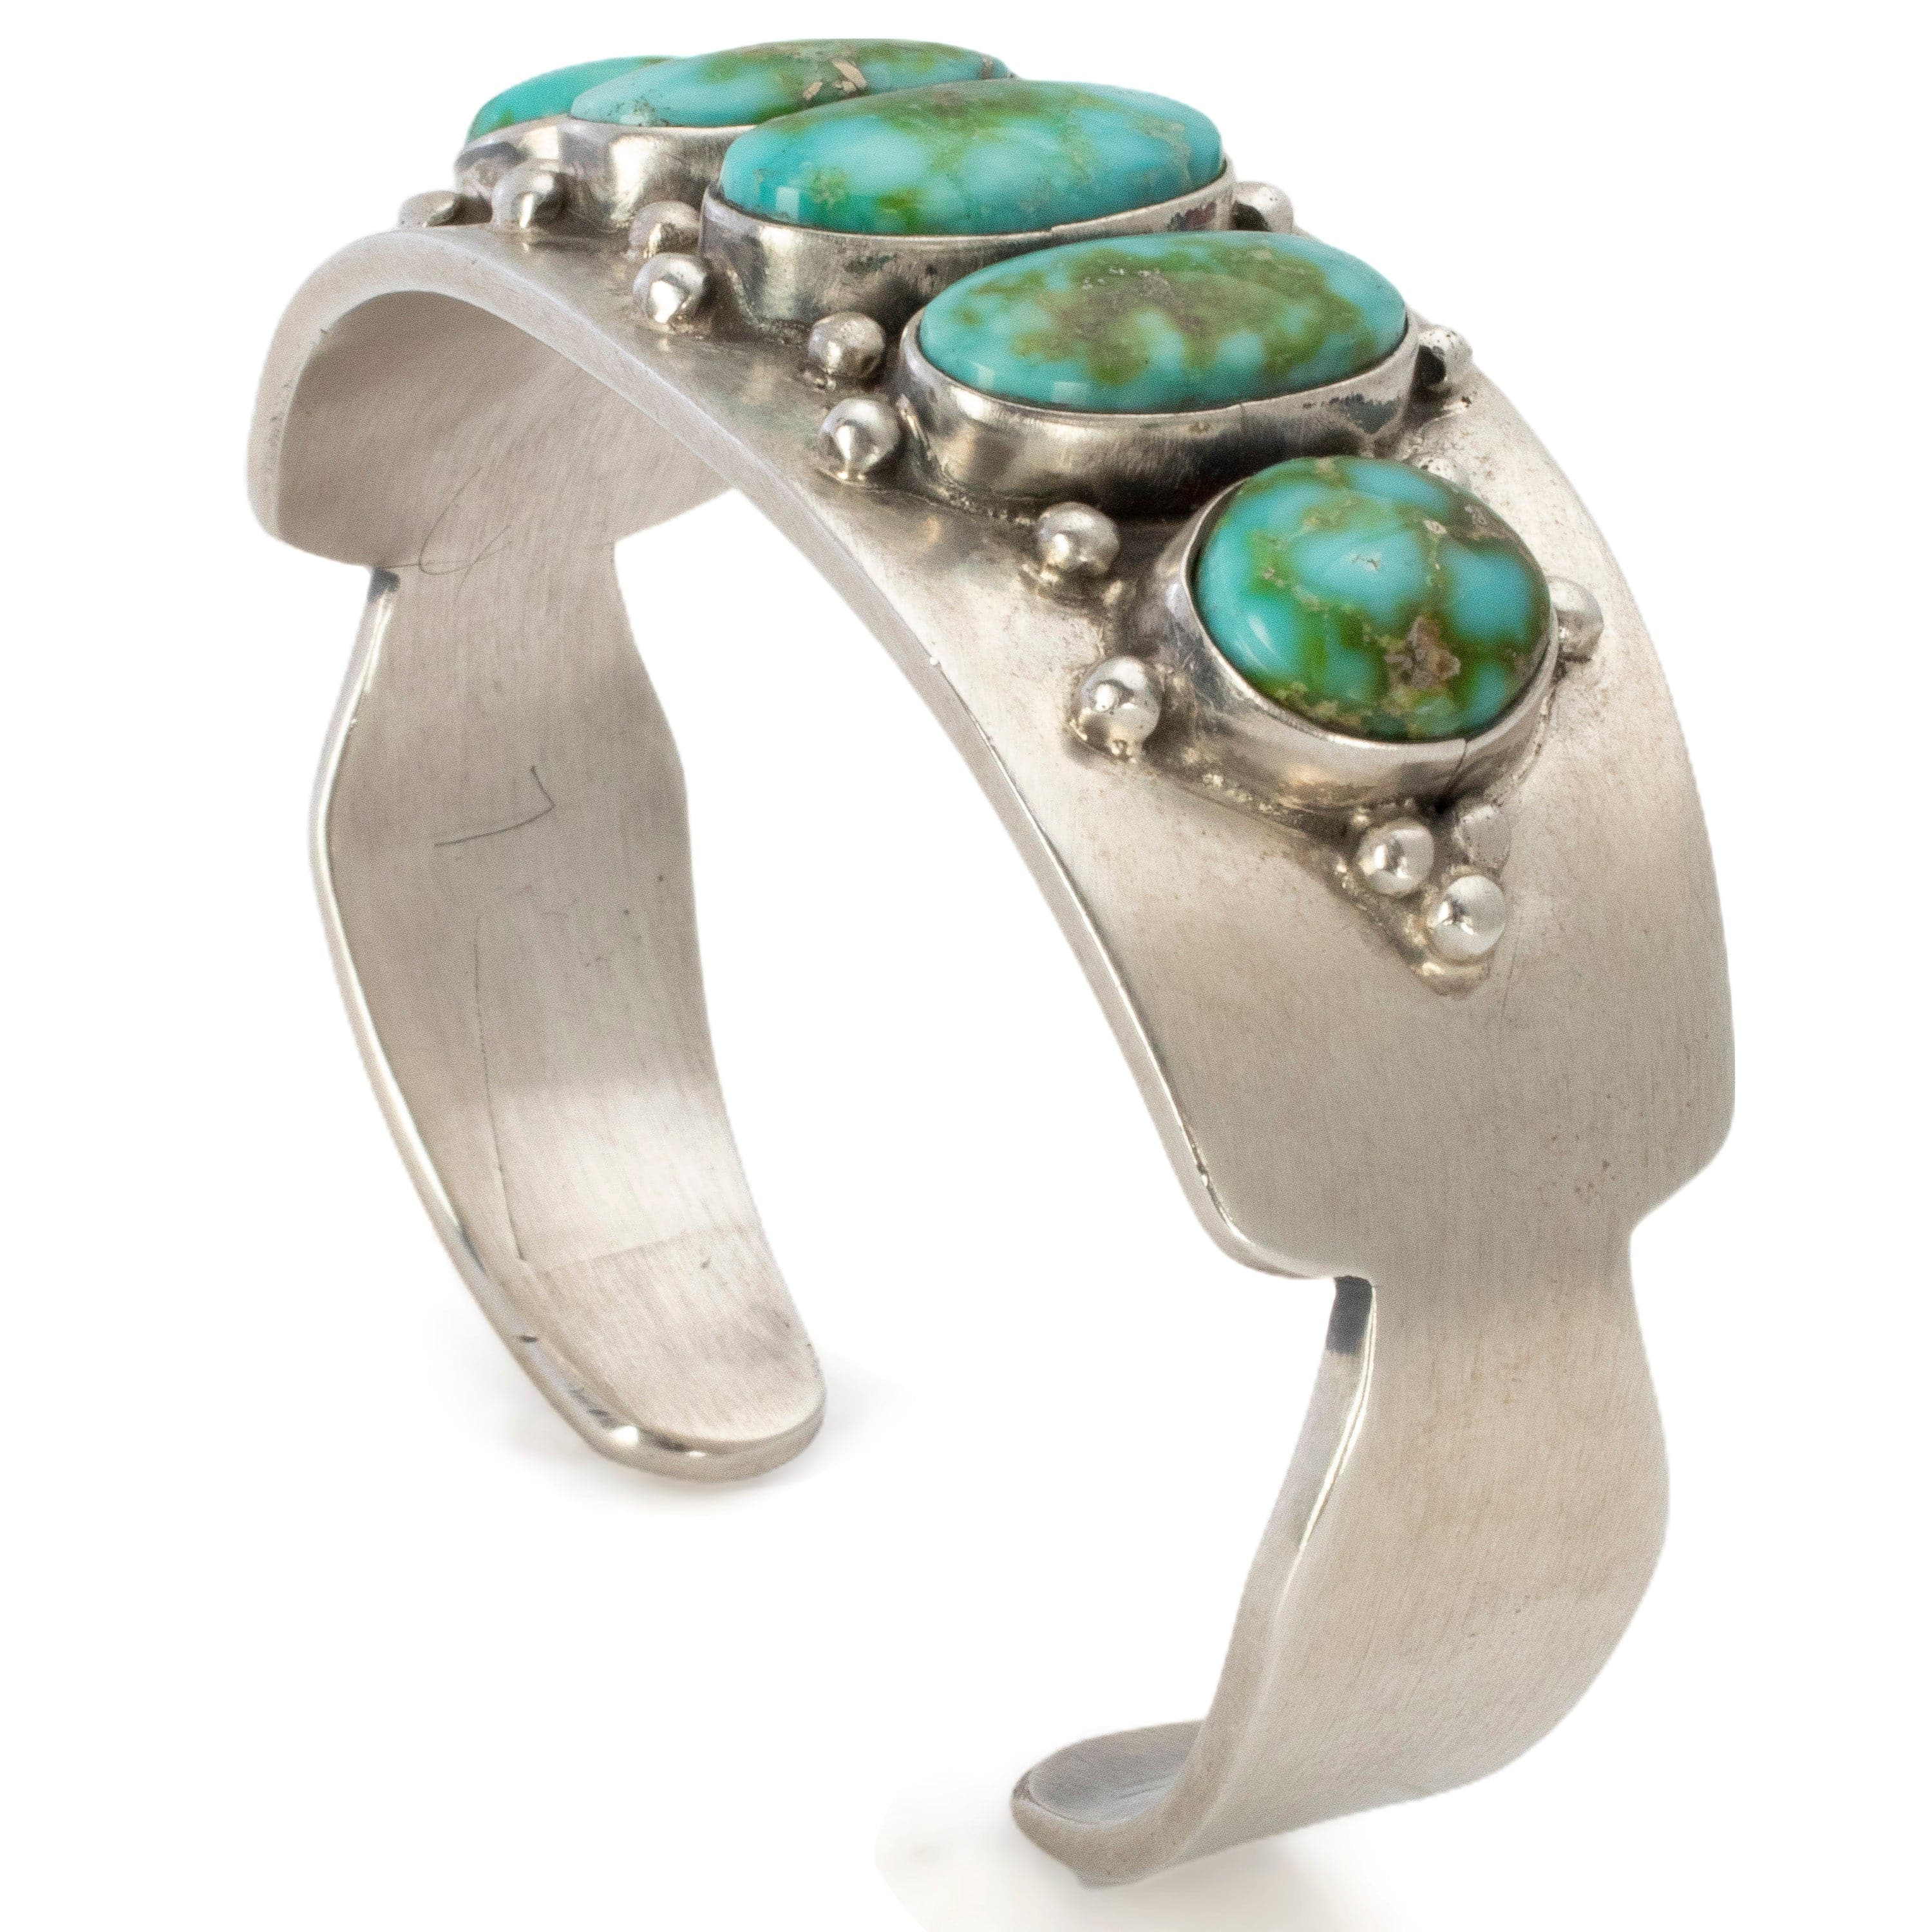 Kalifano Native American Jewelry Bobby Becenti Navajo Sonoran Gold Turquoise USA Native American Made 925 Sterling Silver Cuff NAB3000.011